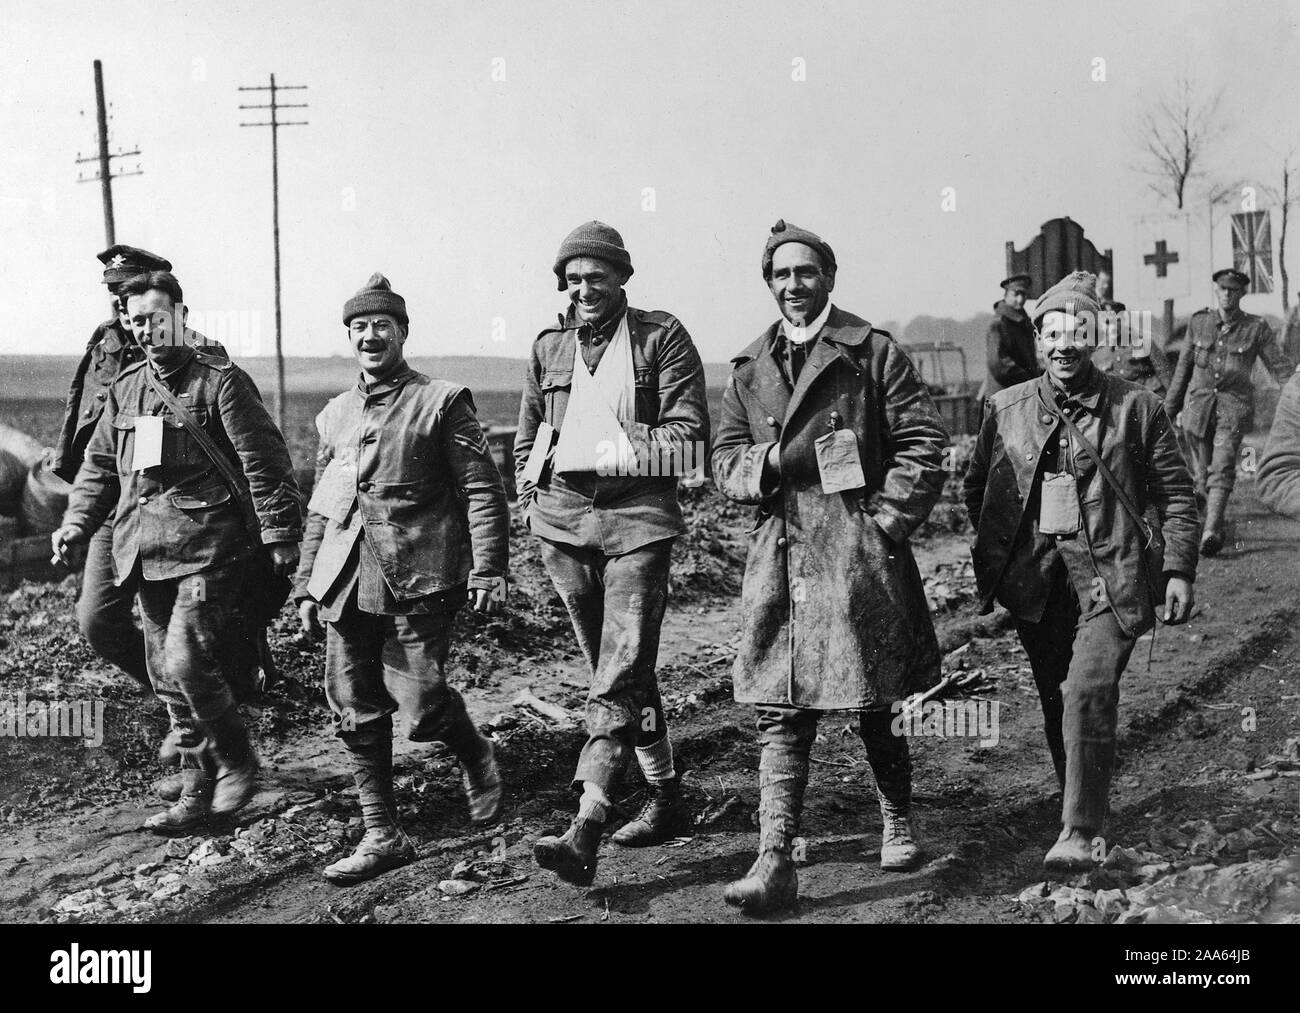 Alternative Title: Official photograph taken on the British Western Front in France : The German offensive - The spirit of our army  Description: keep smiling, carry on! Wounded just arriving from the fighting line leaving the Casualty Clearing Station.  Date Created: 1914  Photo Credit: UBC Library Stock Photo